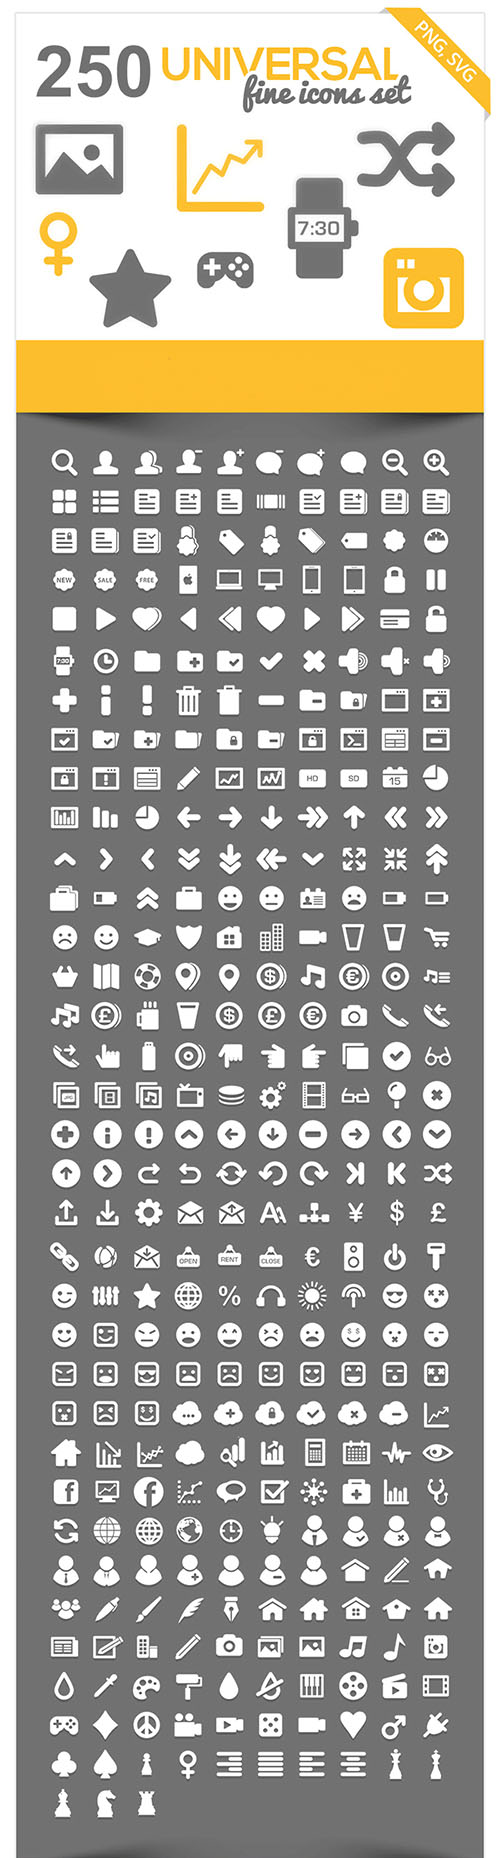 SVG Web Icons - 250 Universal Icons Pack